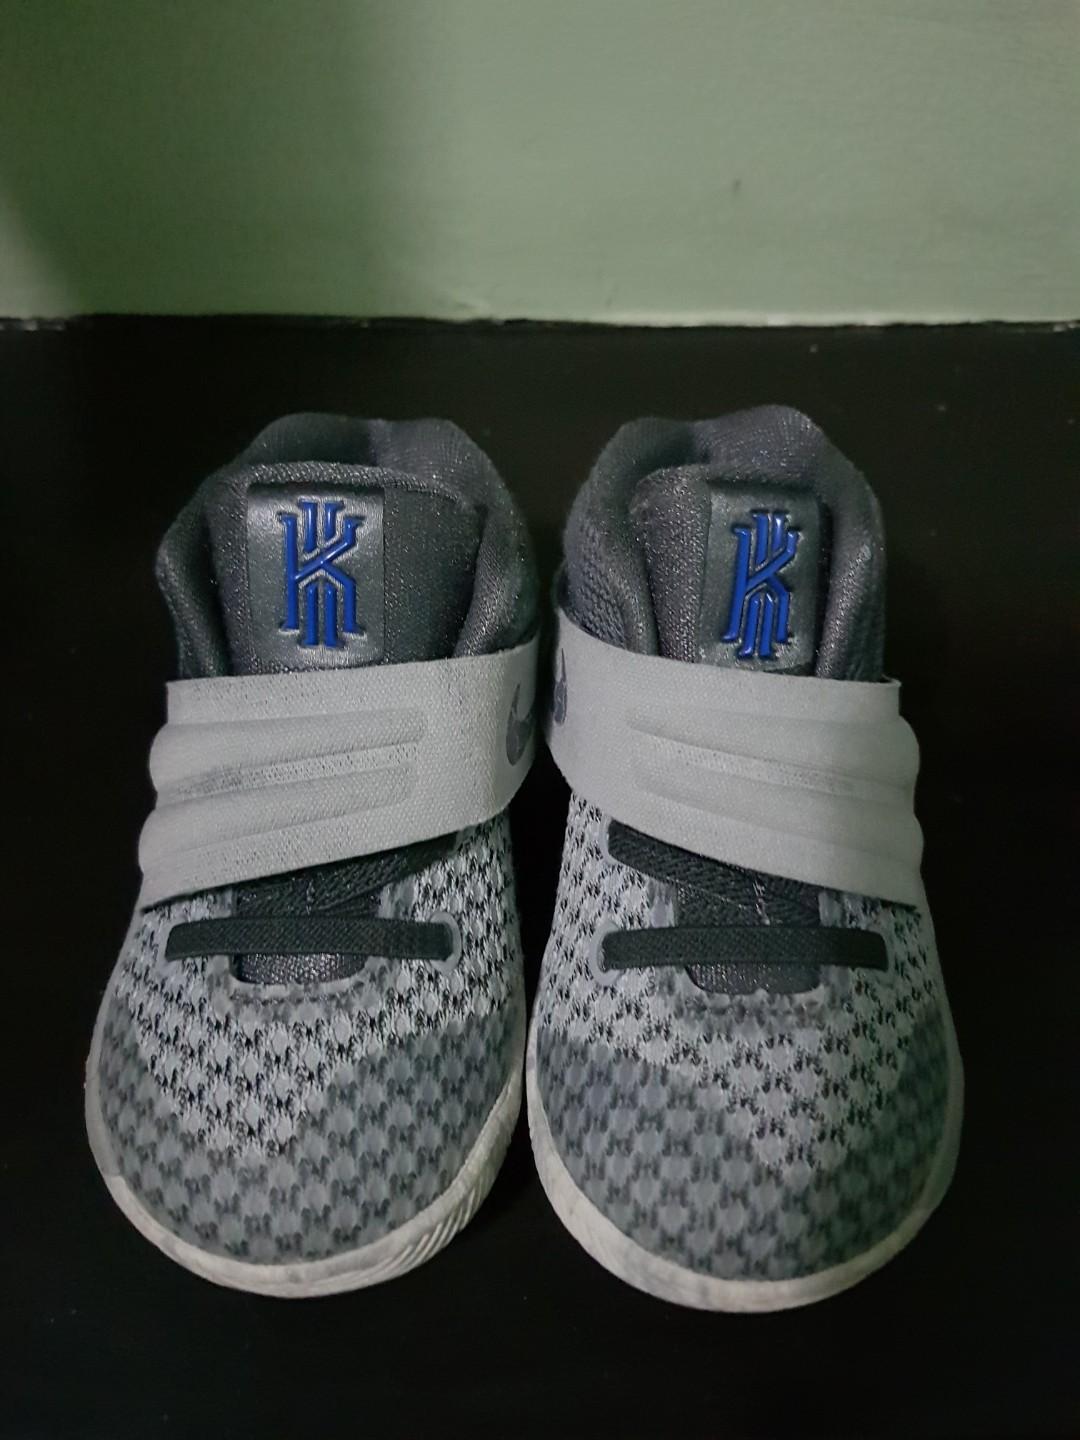 kyrie irving baby shoes